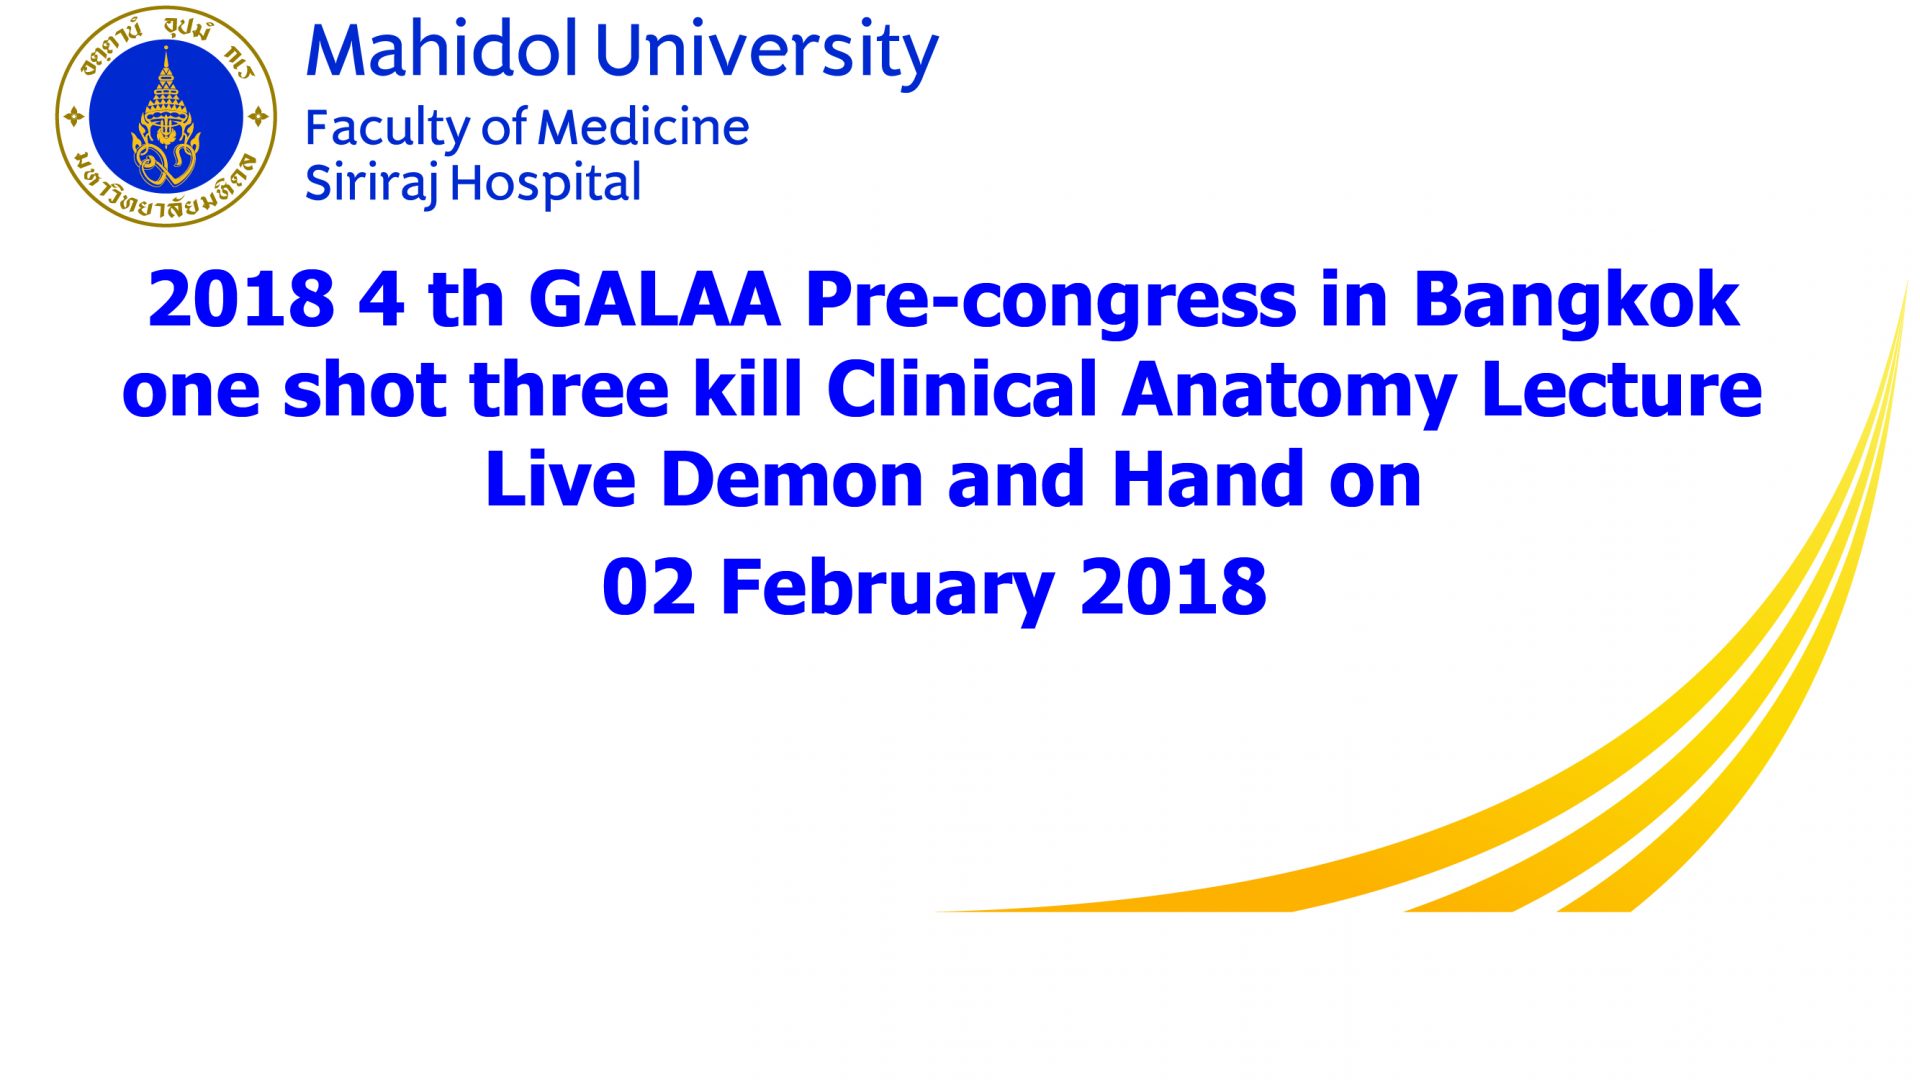 2018, 4 th GALAA Pre-congress in Bangkok one shot three kill Clinical Anatomy Lecture Live Demon and Hand on